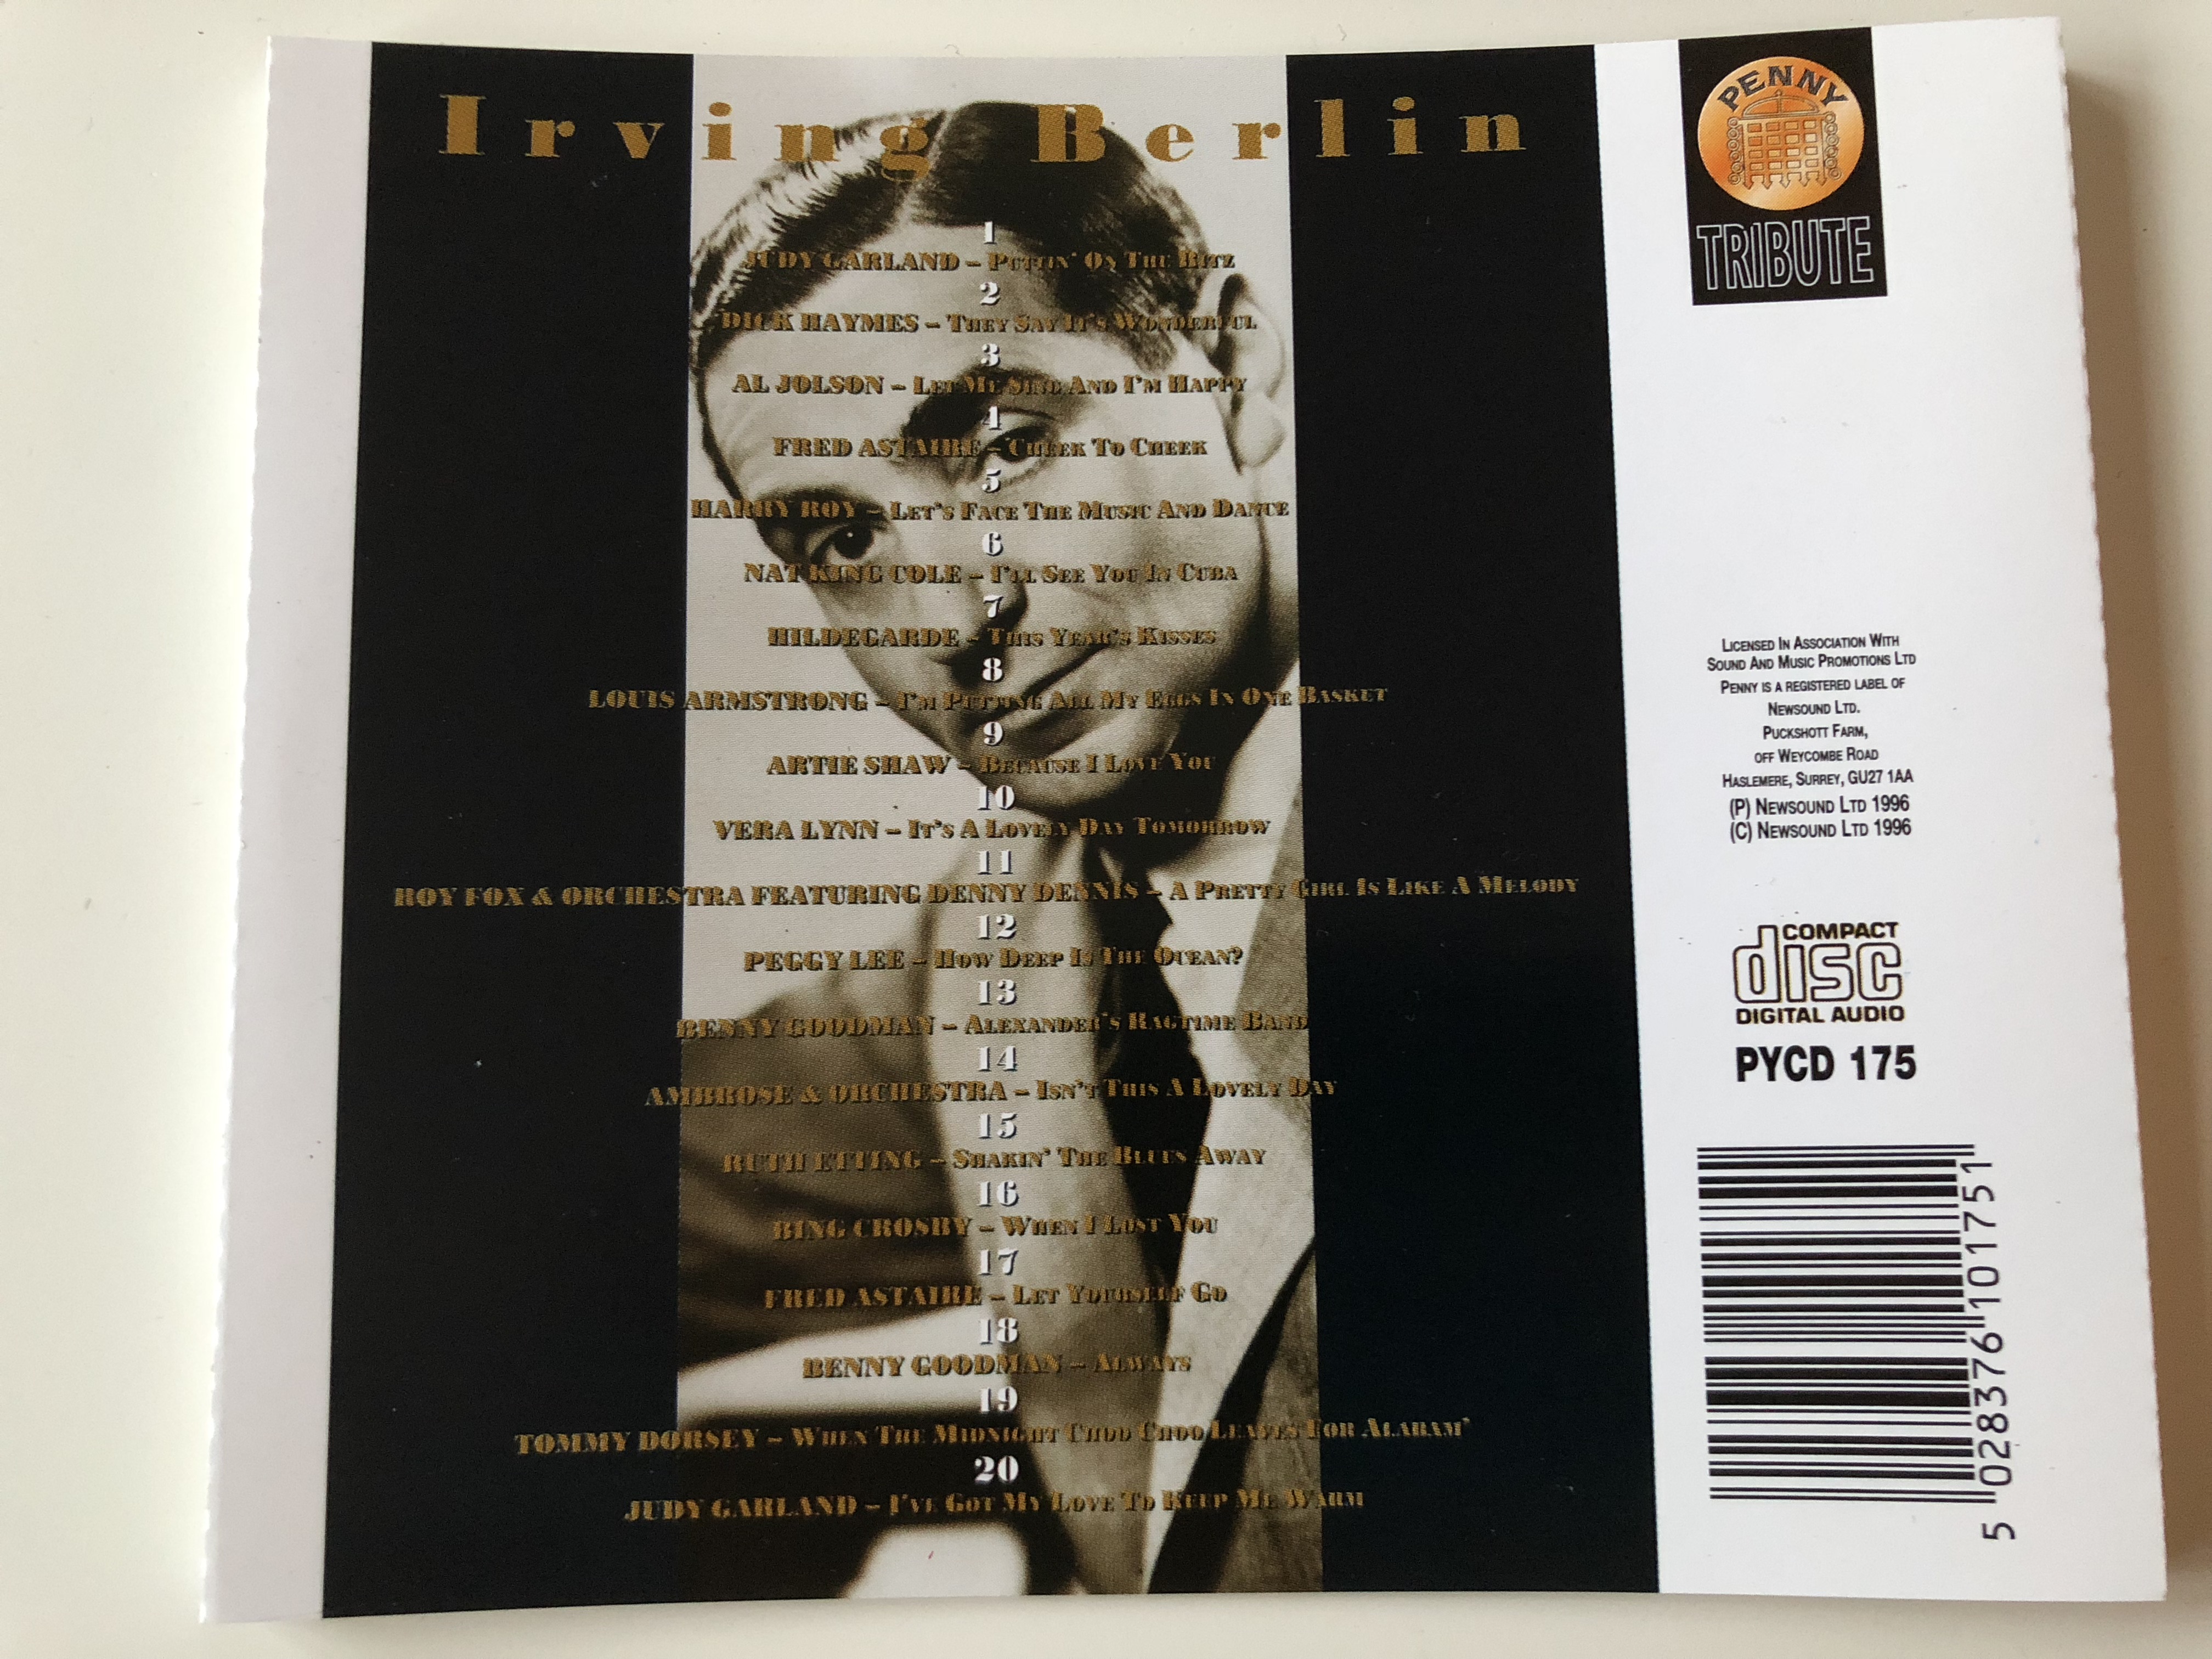 irving-berlin-a-tribute-20-tracks-original-artists-peggy-lee-artie-shaw-al-jolson-fred-astaire-louie-armstrong-judy-garland-audio-cd-1996-pycd-175-2-.jpg